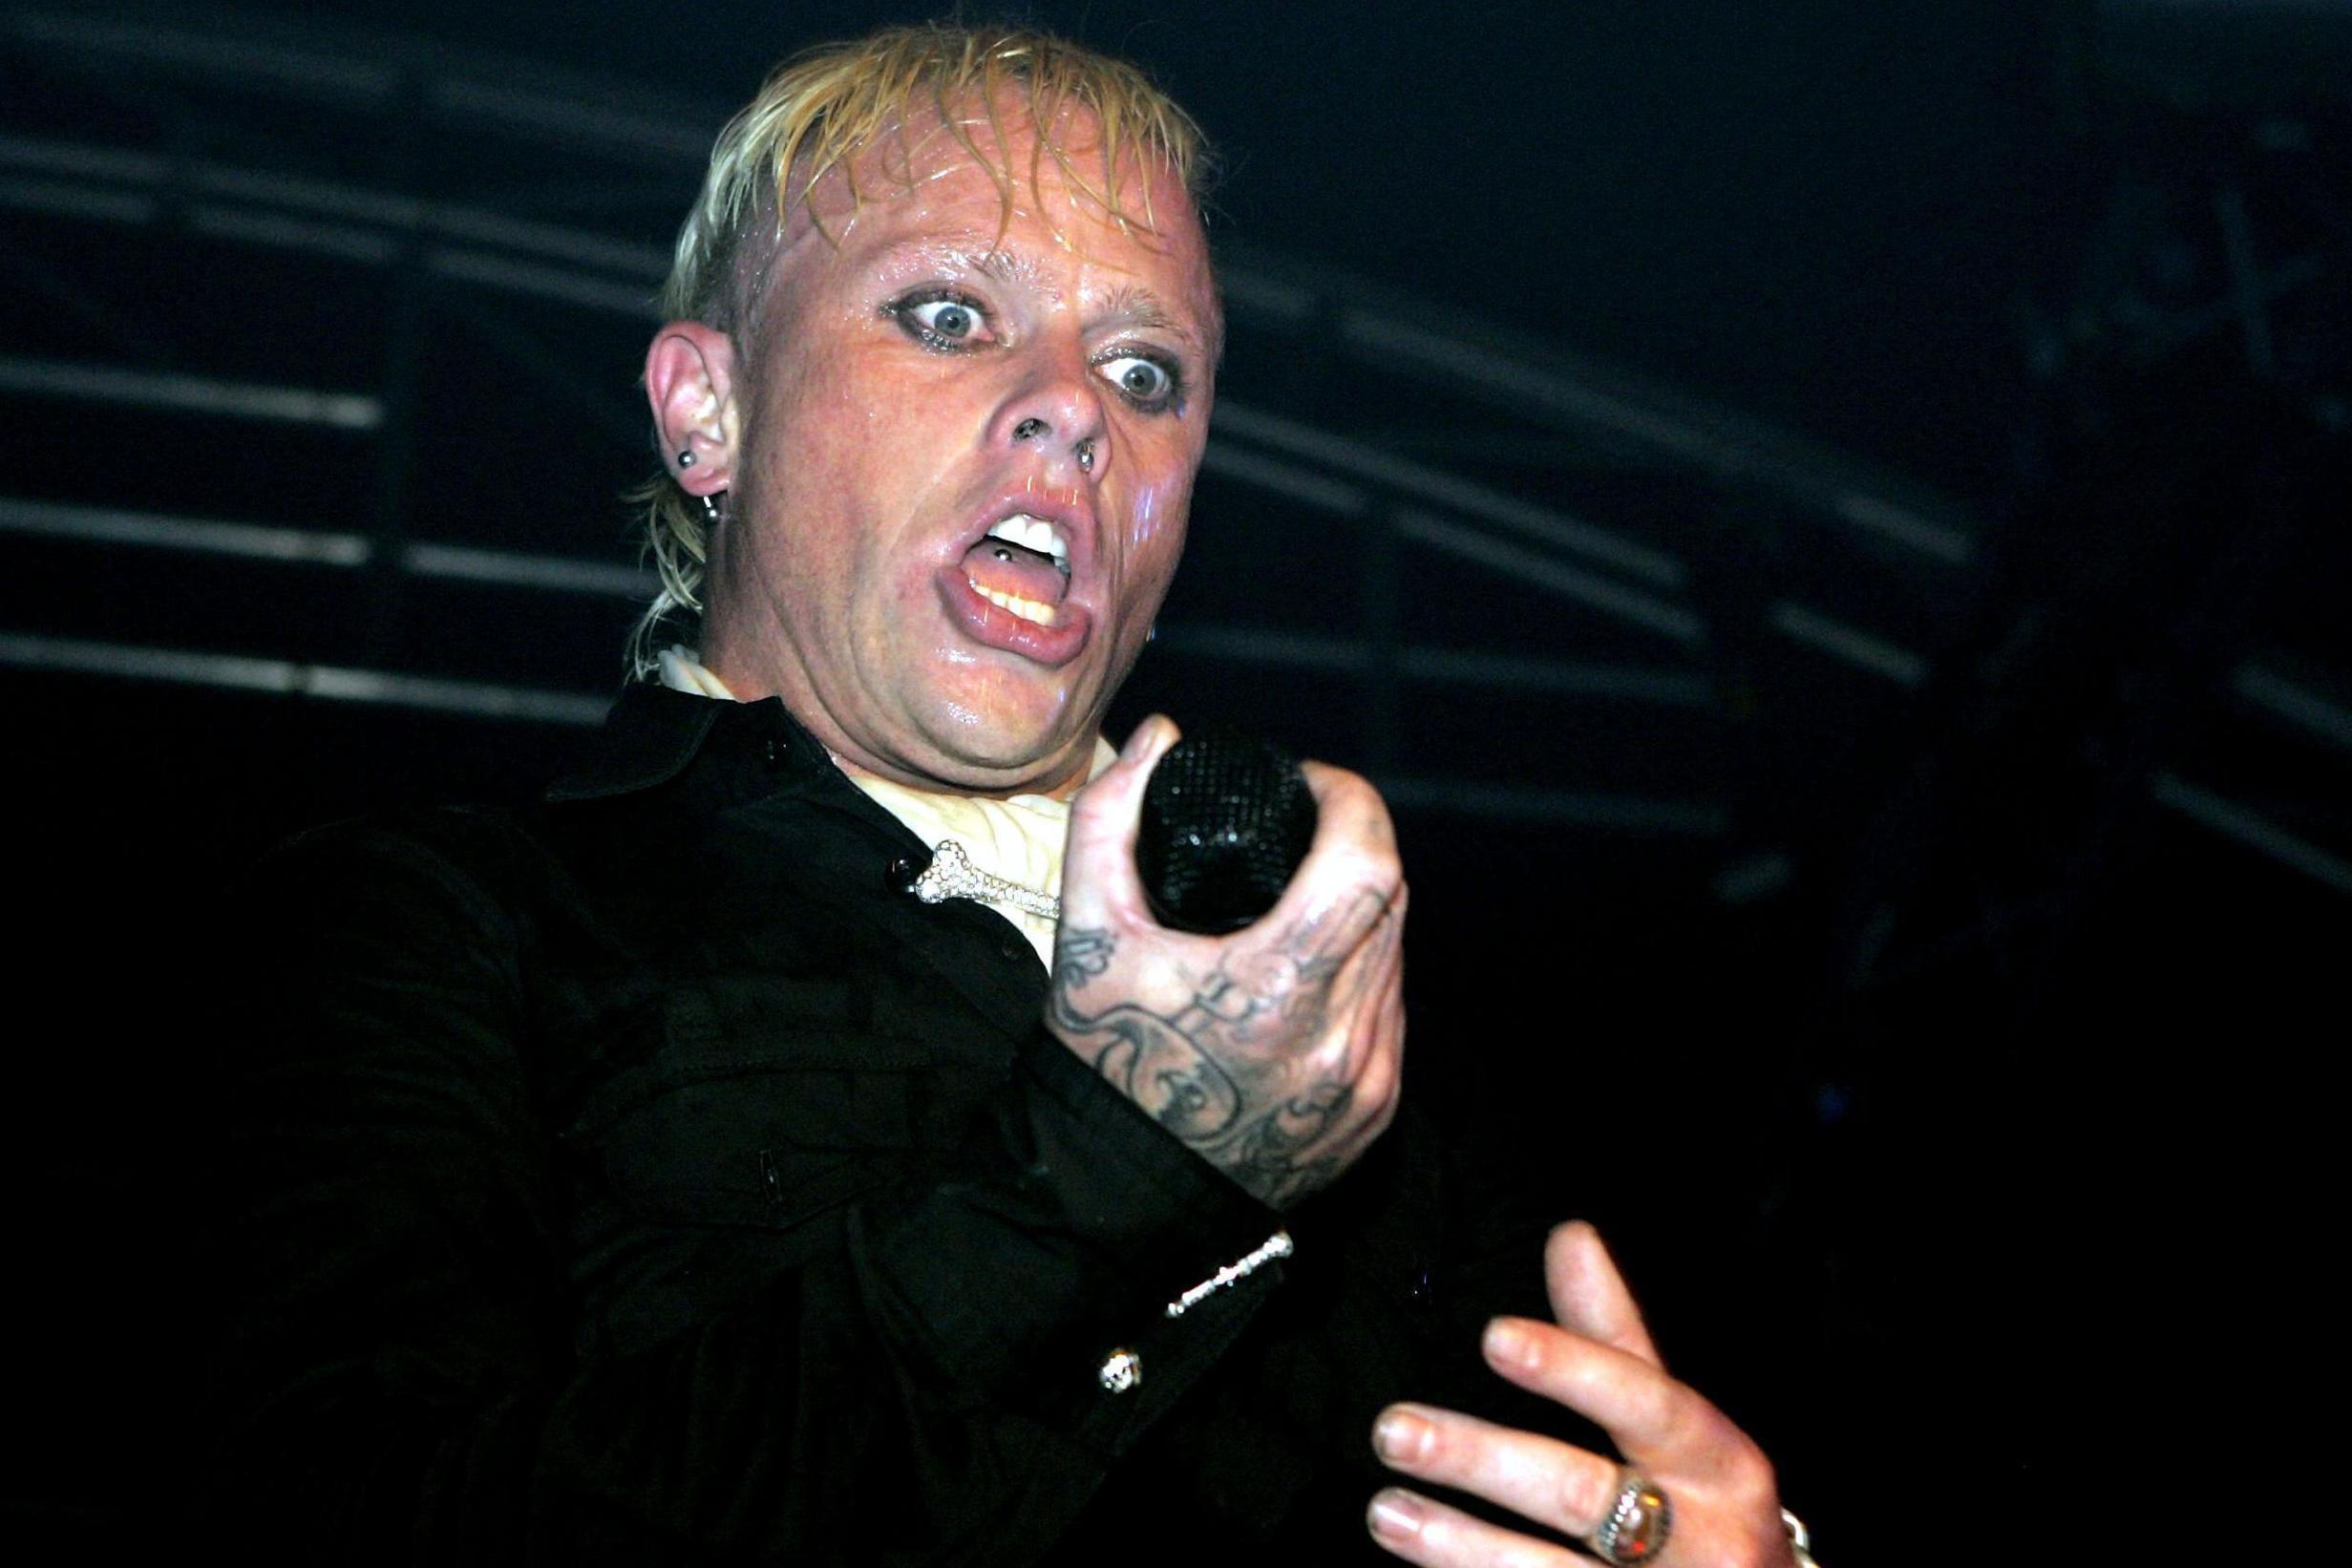 BBC presenter pays tribute to Keith Flint (Getty)